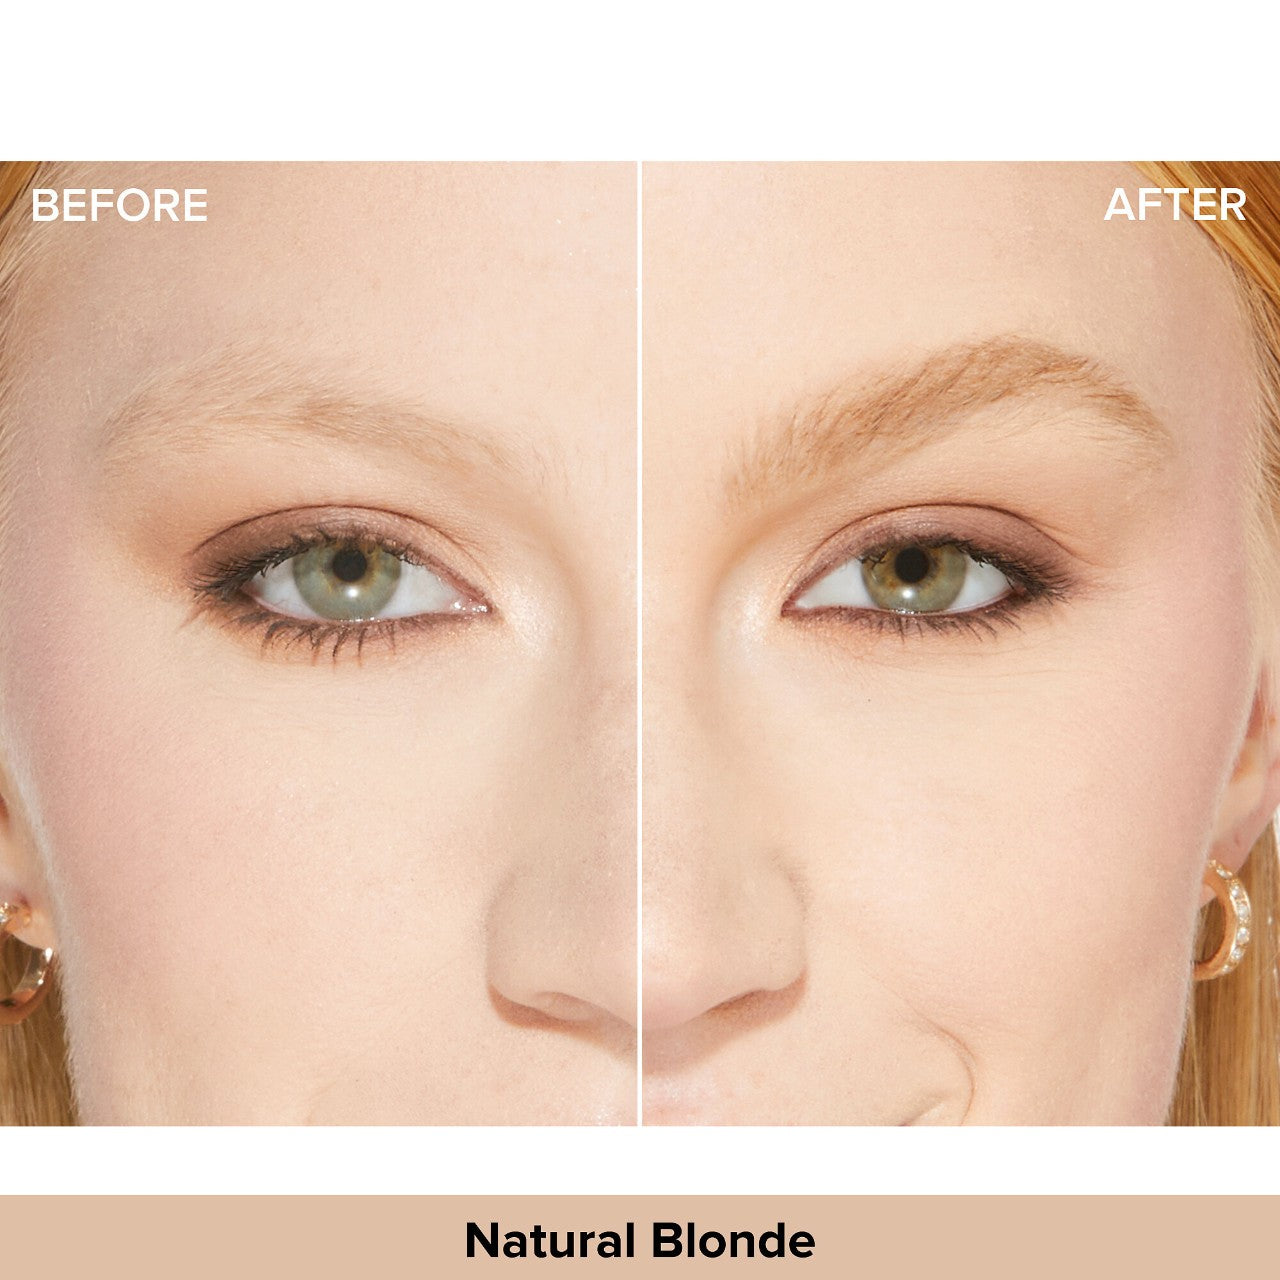 Too Faced "Natural Blonde" Pomade In A Pencil Waterproof Eyebrow Pencil